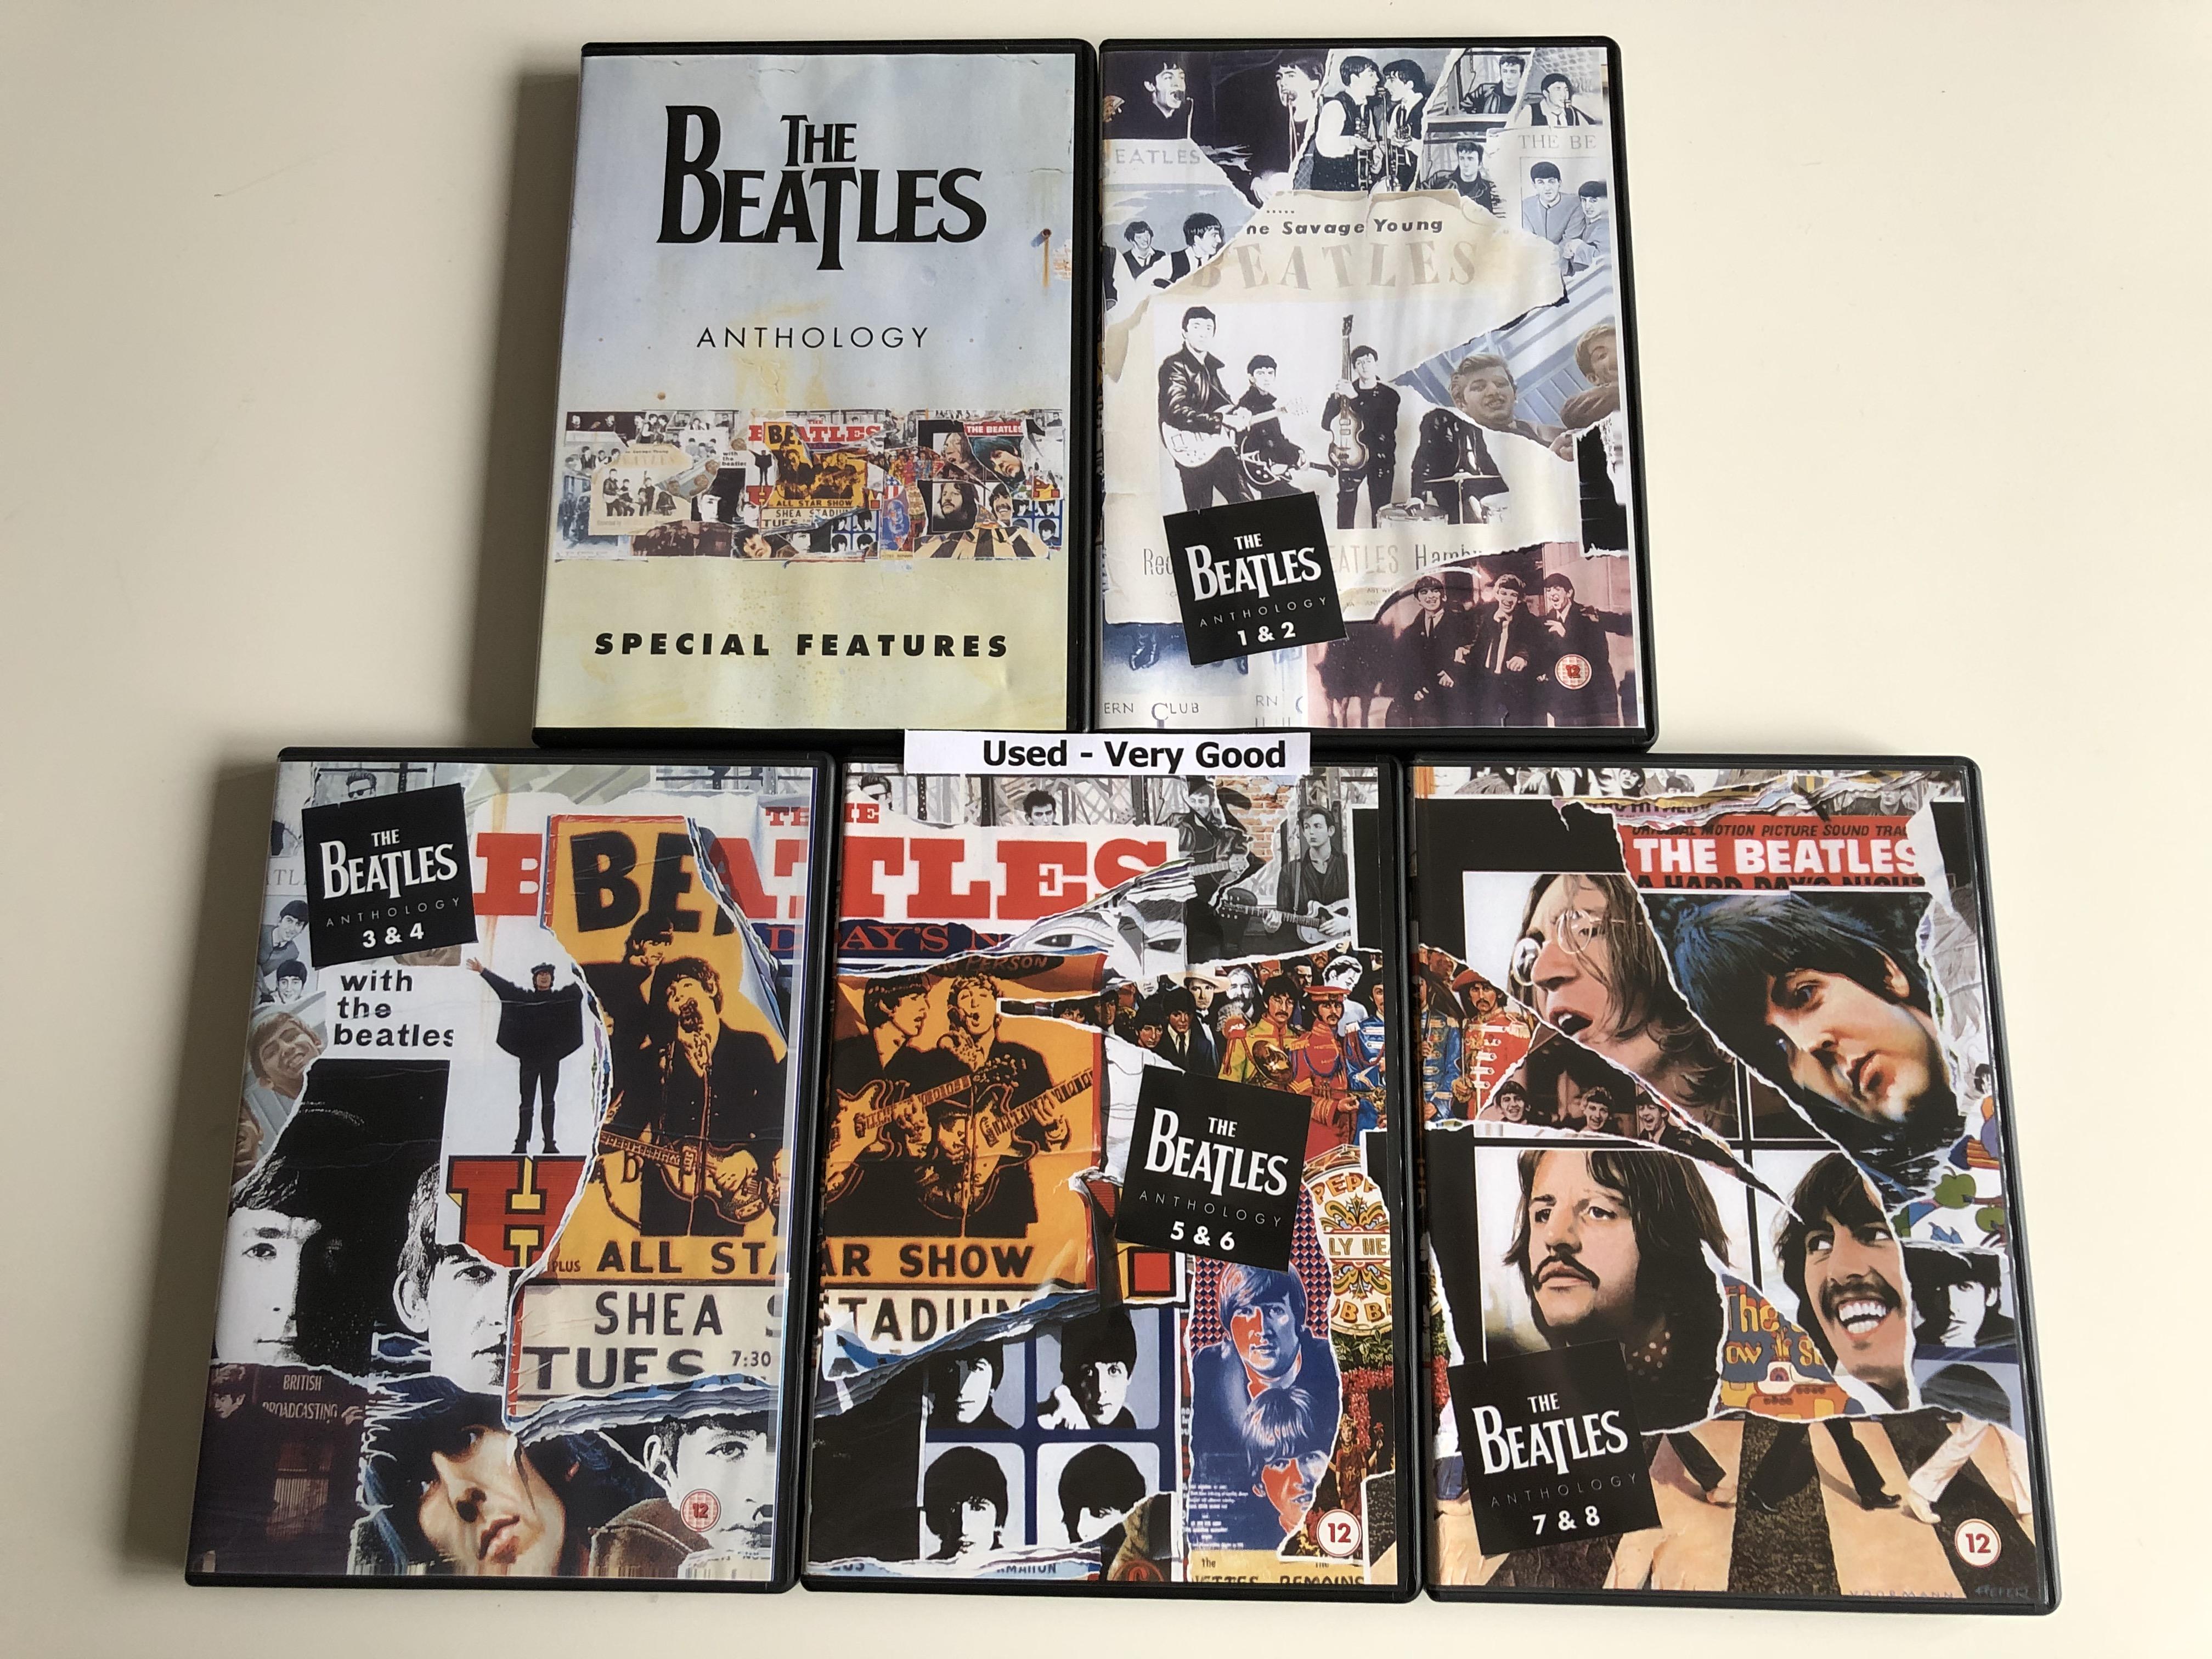 The Beatles Anthology DVD Set 2003 / 5 discs / 8 episodes documentary  series / Directed by Geoff Wonfor / Apple Records / Bonus: Special Features  DVD - bibleinmylanguage